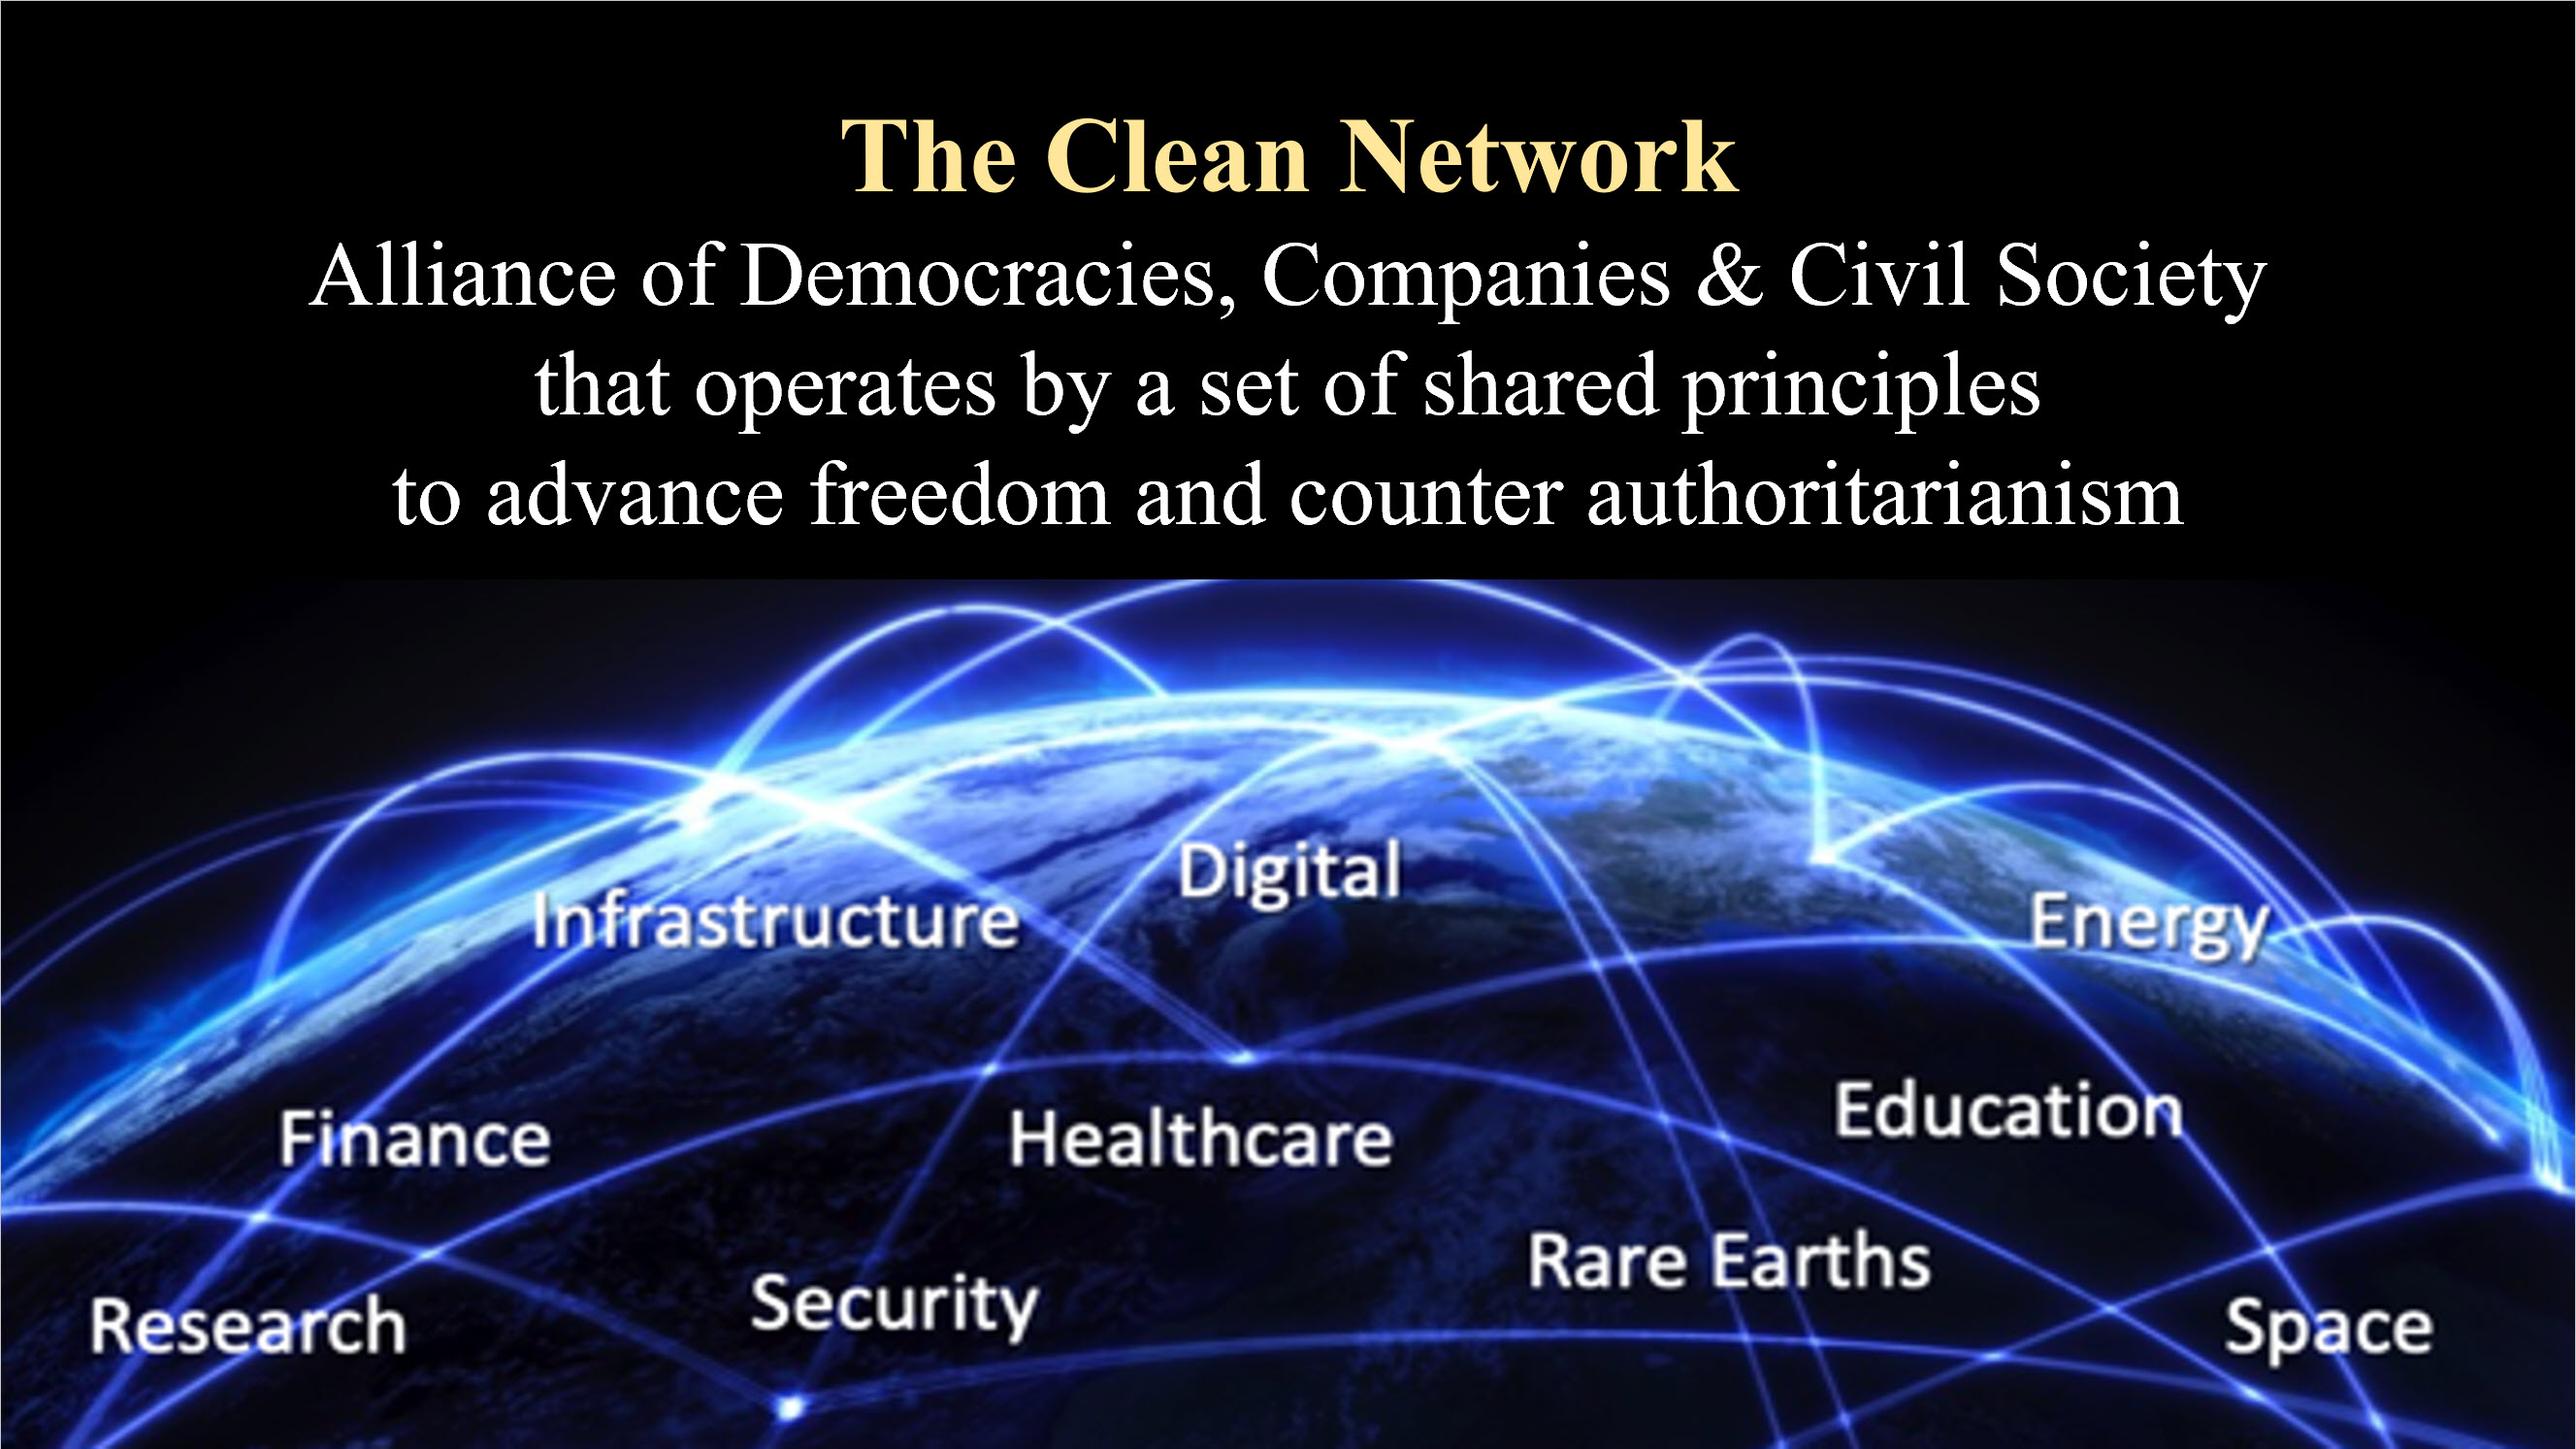 The Clean Network